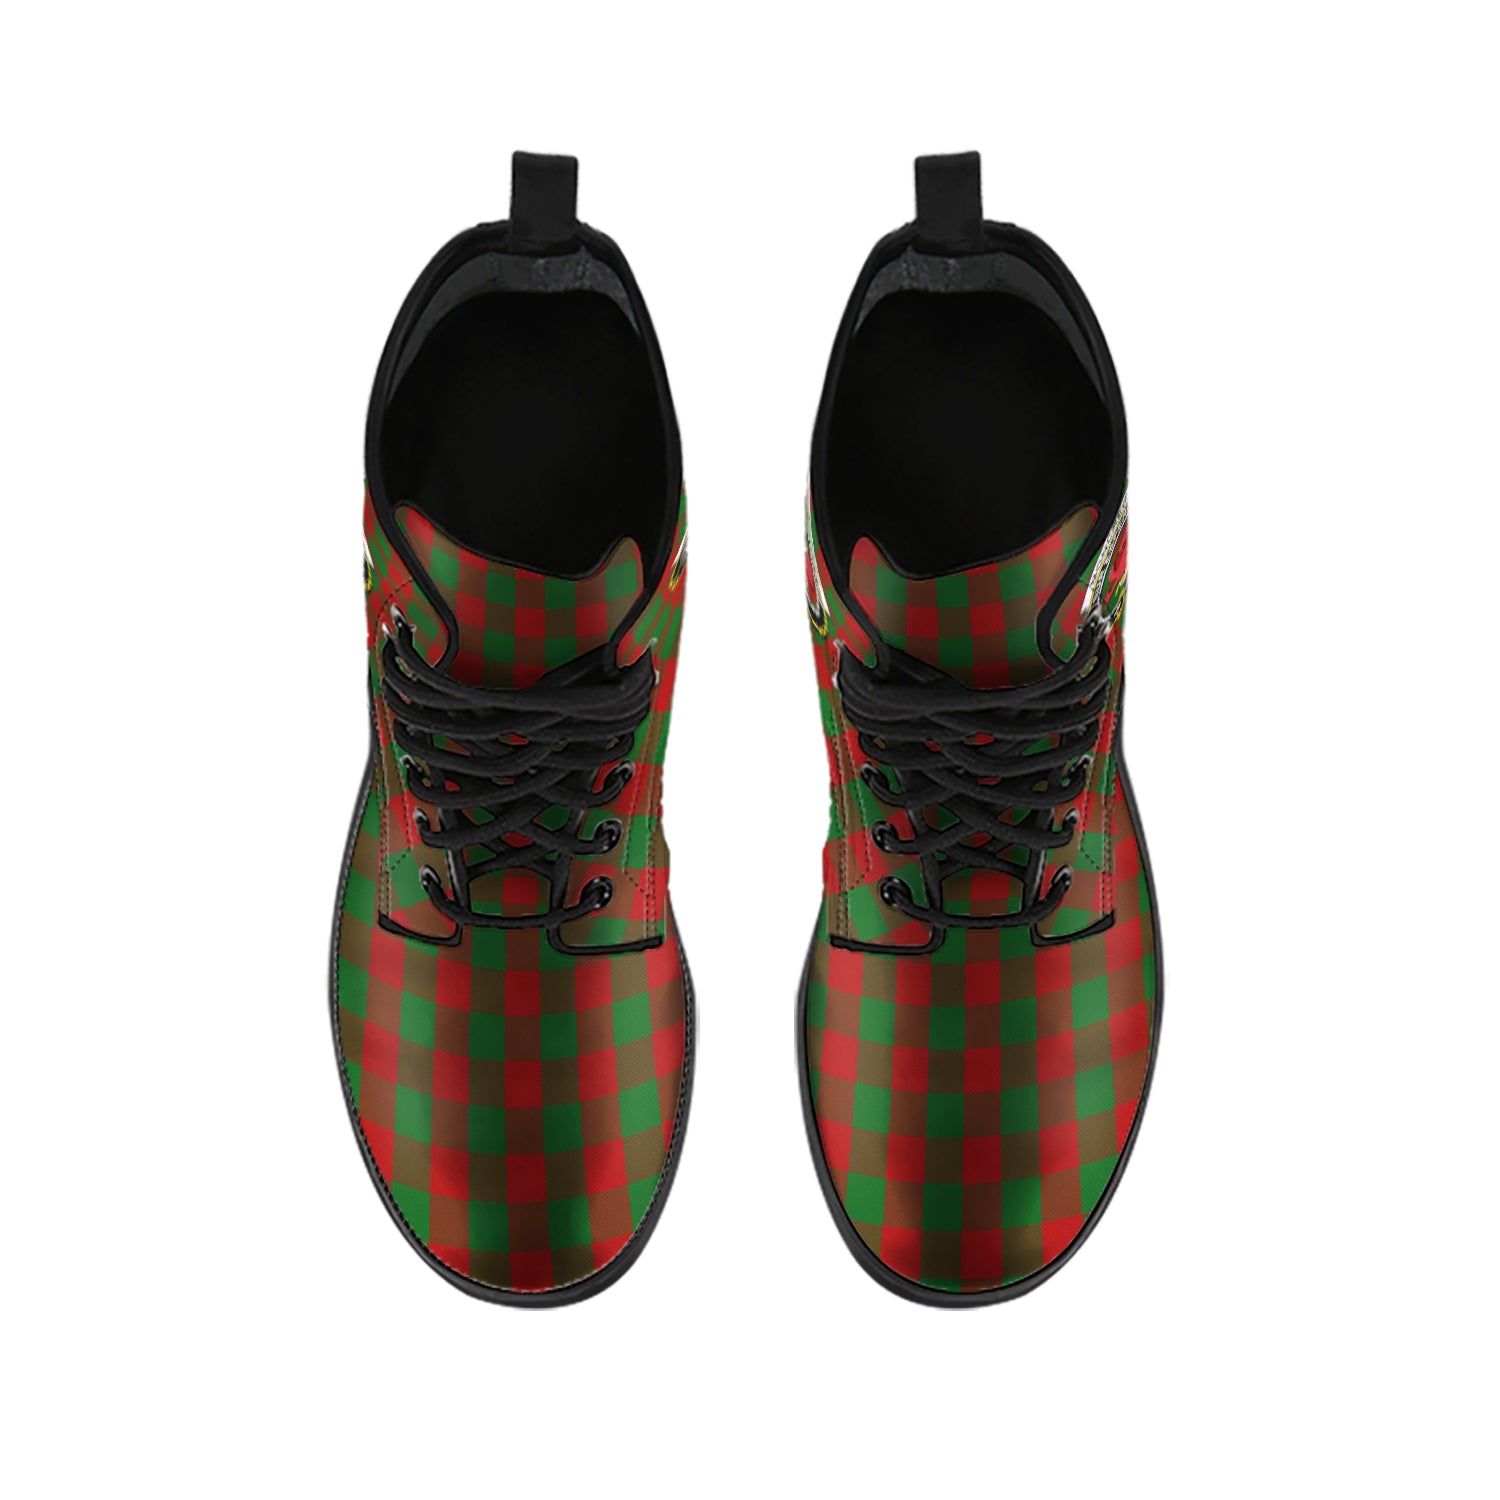 moncrieff-tartan-leather-boots-with-family-crest